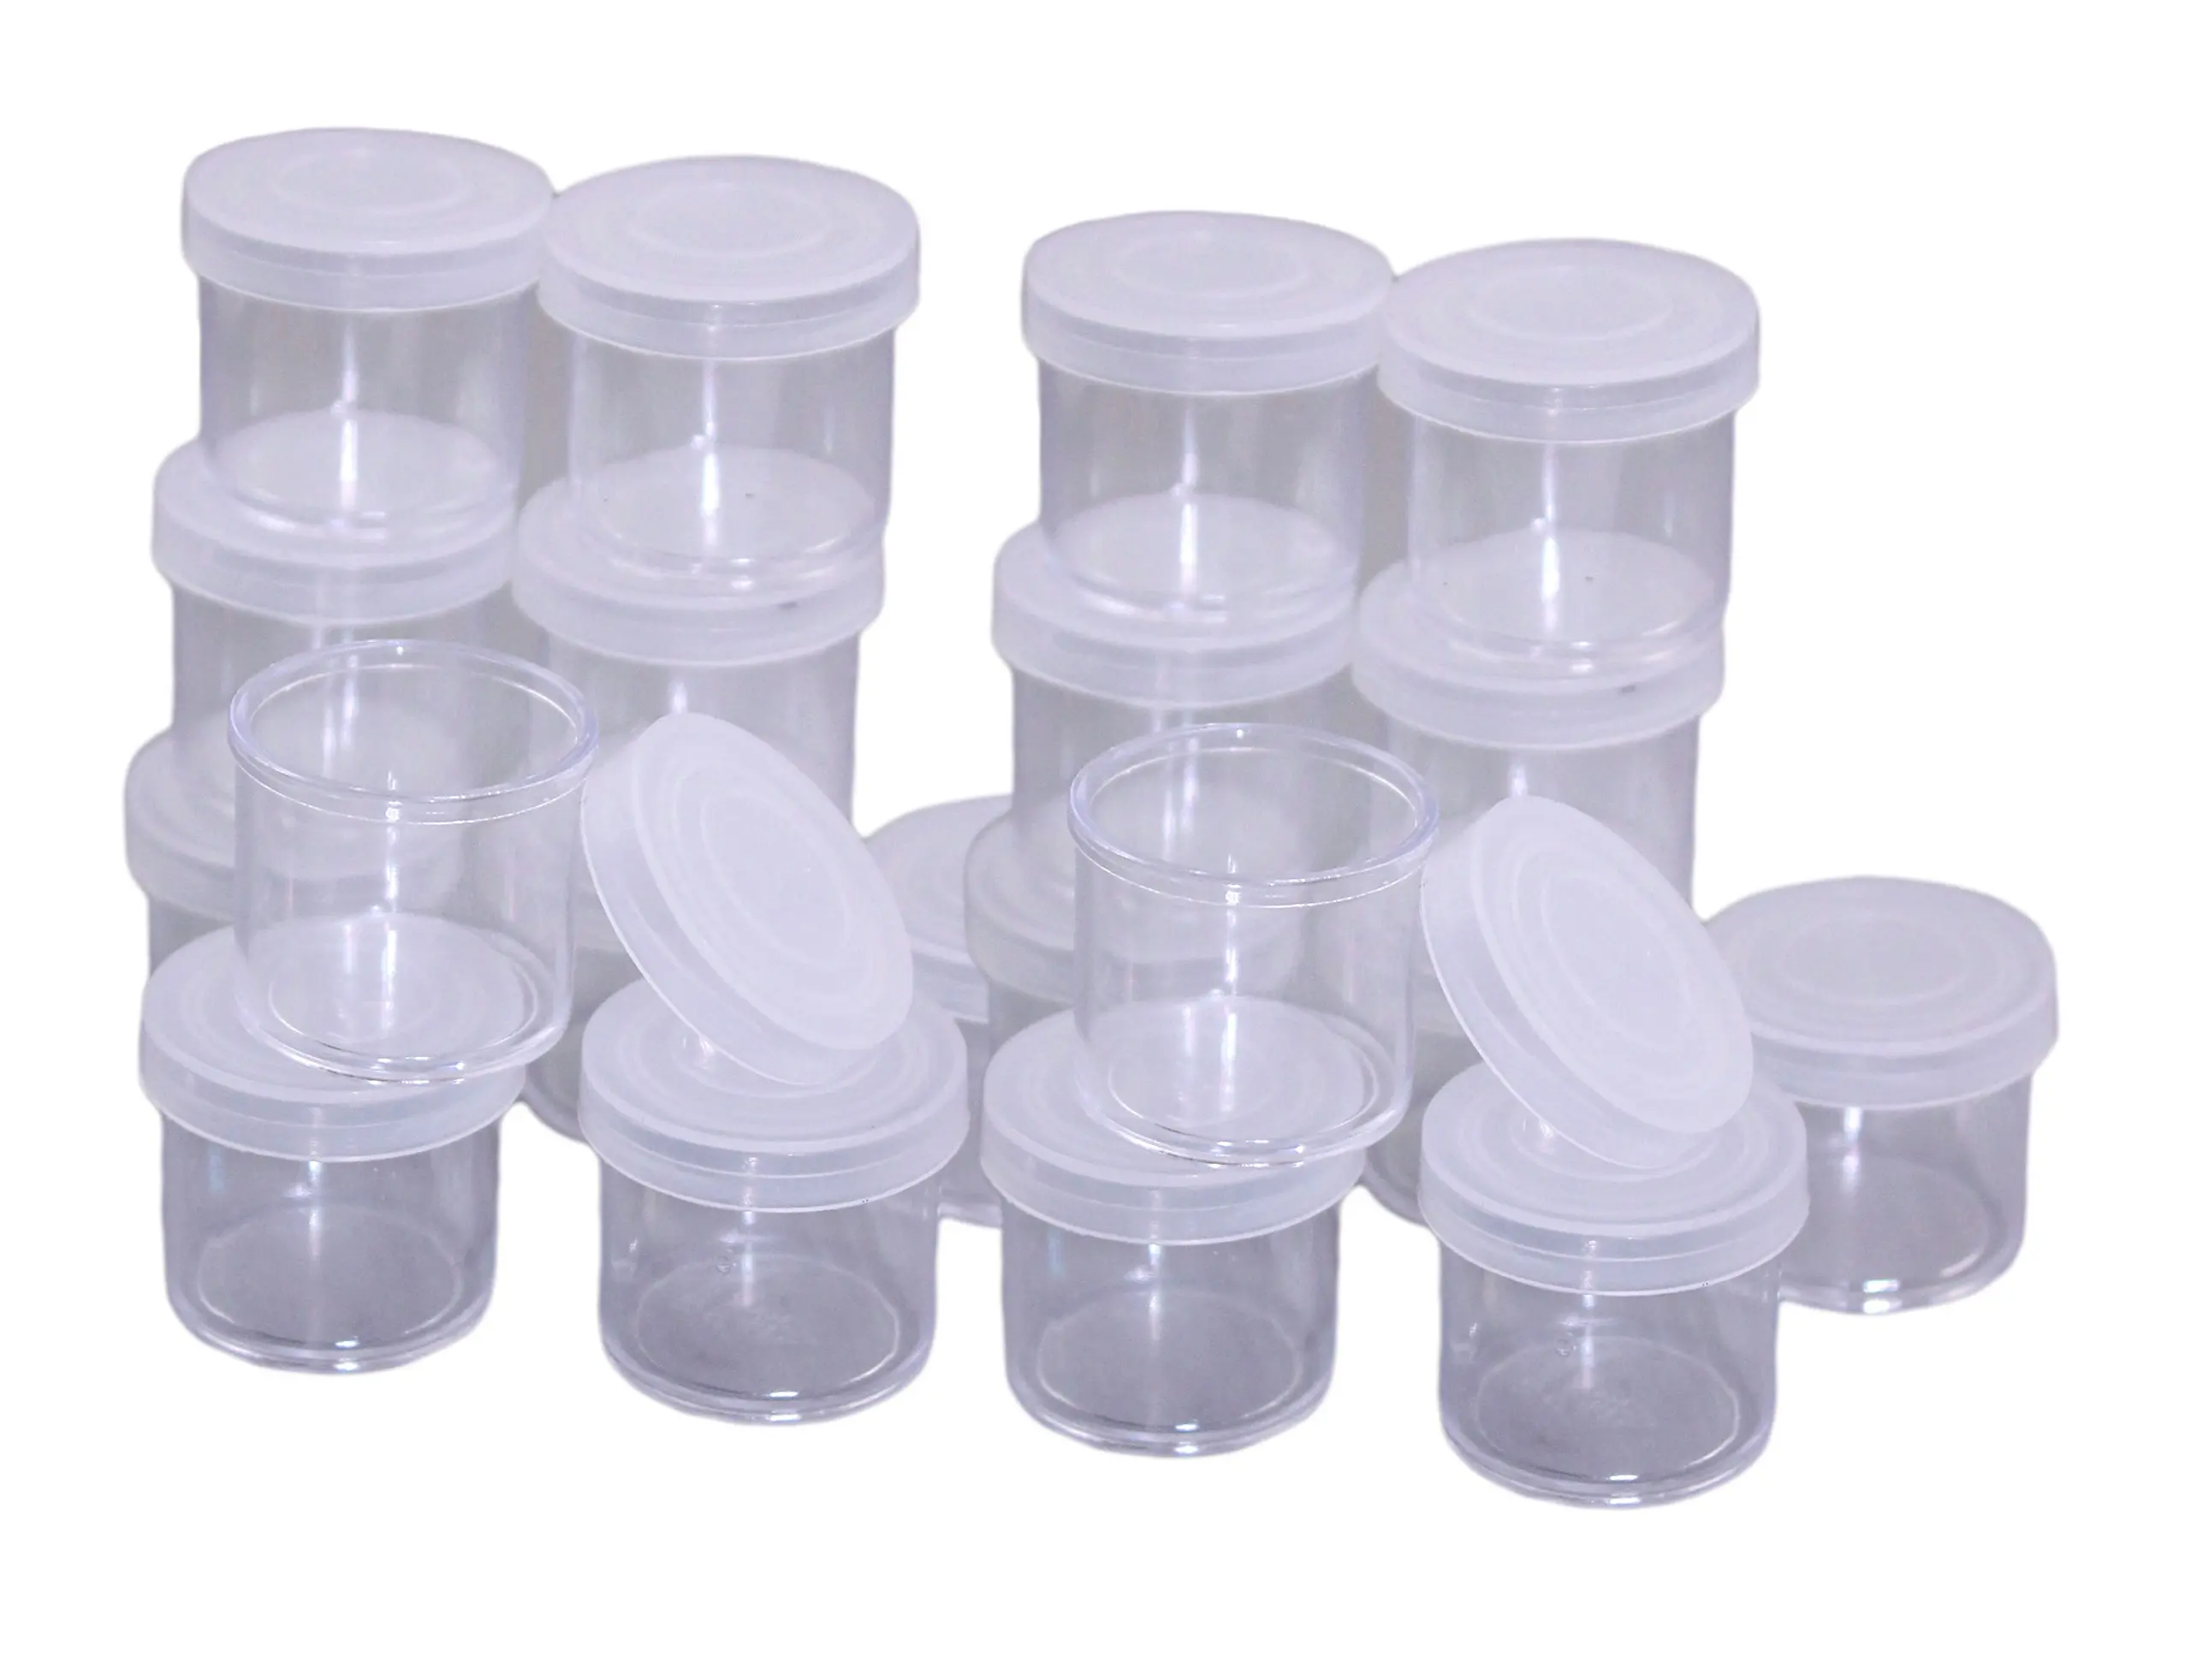 Cheap Small Plastic Containers With Lids, find Small Plastic Containers